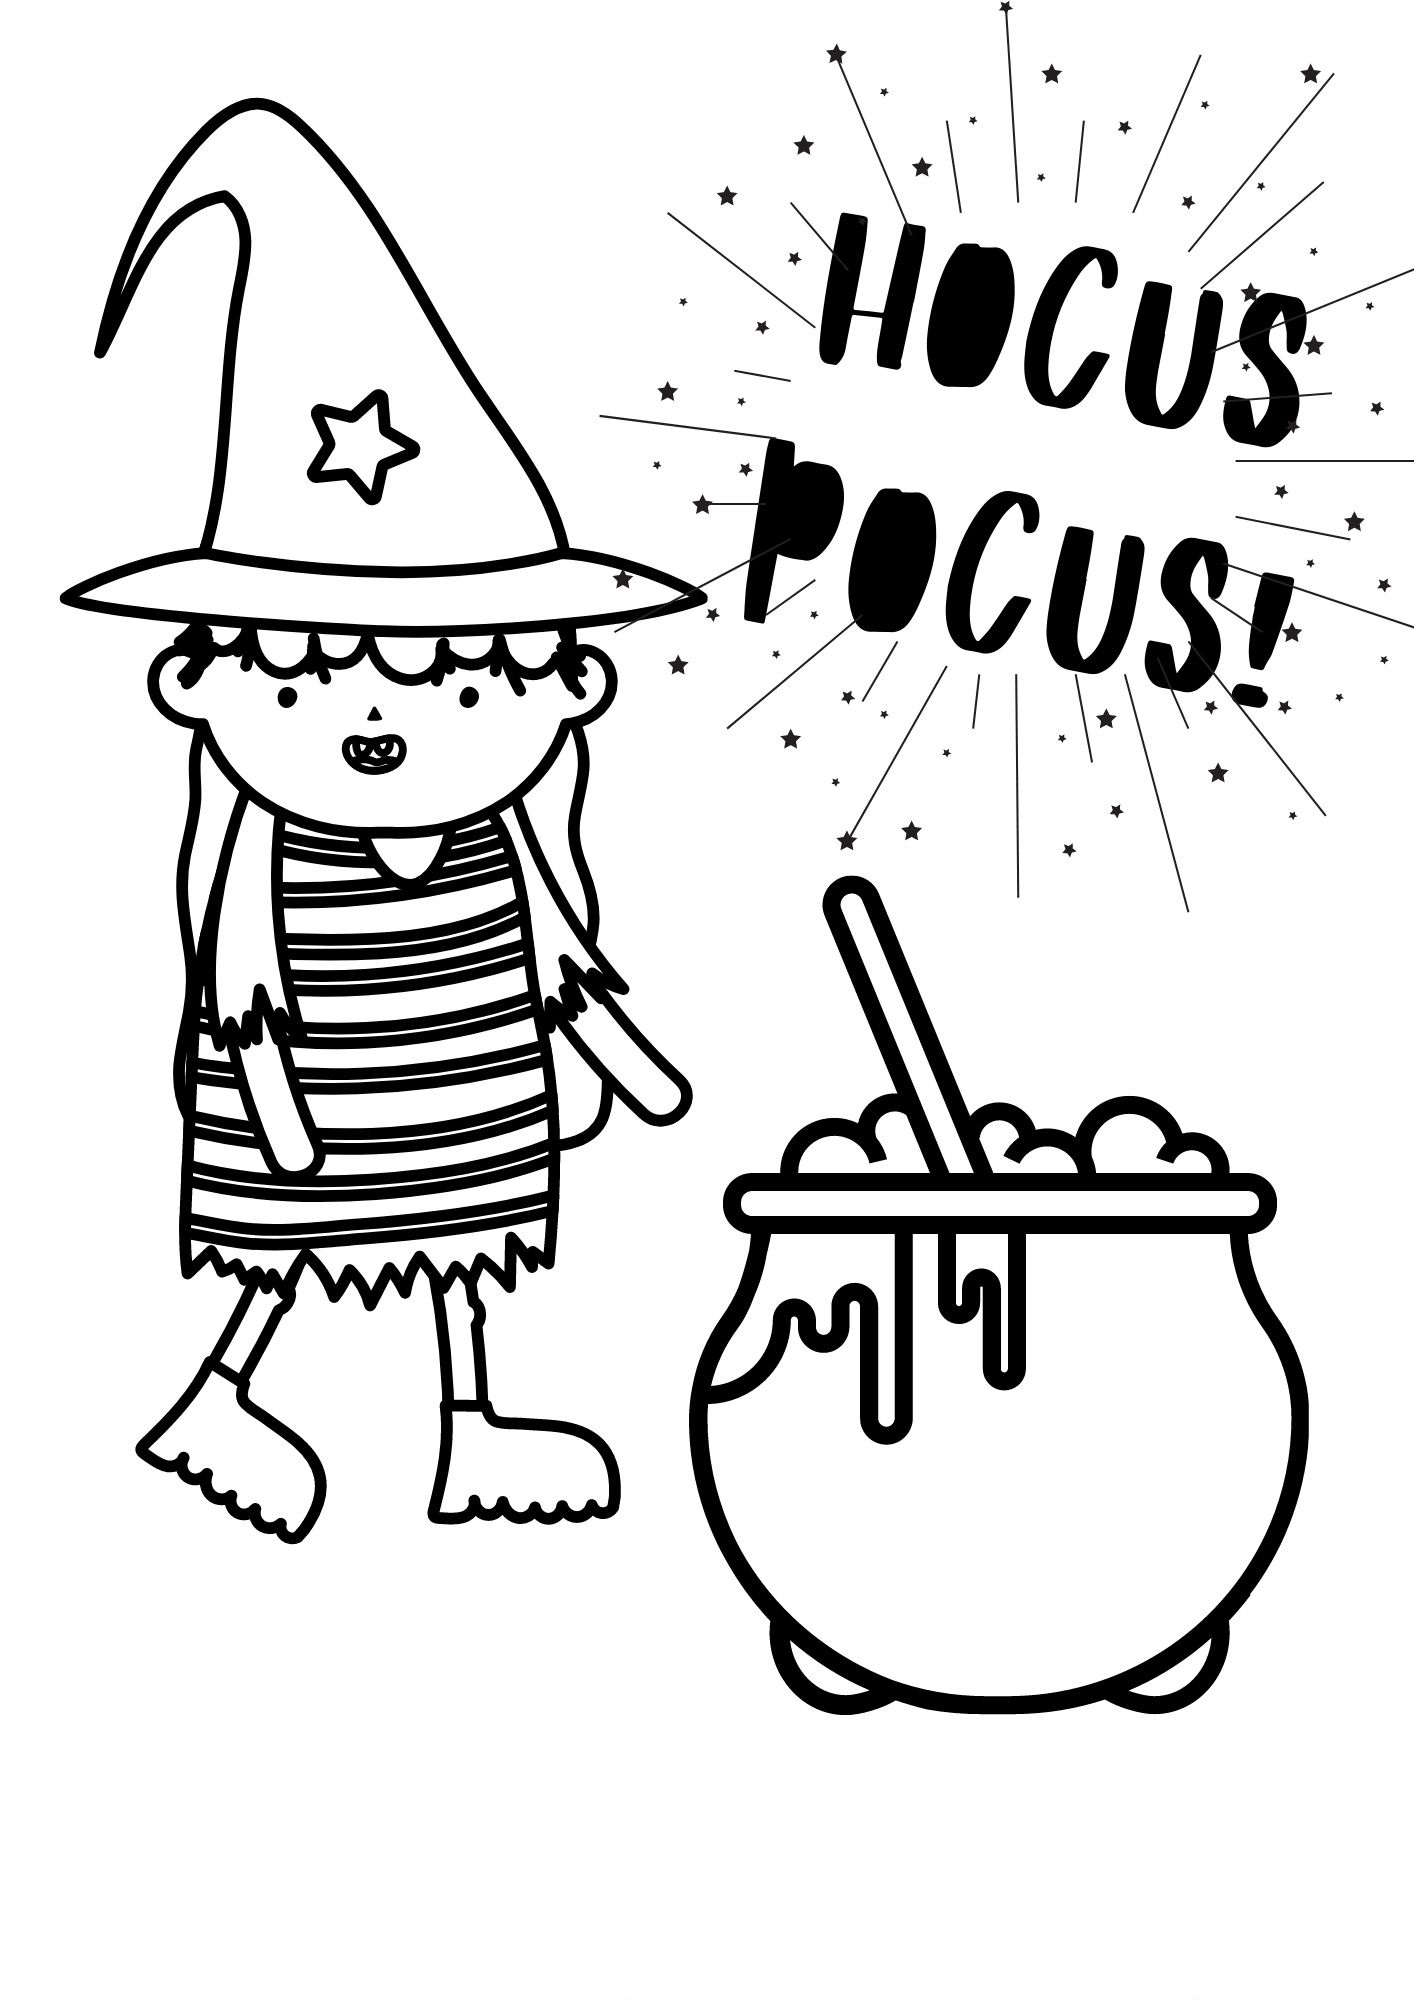 Printable Hocus Pocus Coloring Pages - Hocus Pocus Coloring Page For Kids